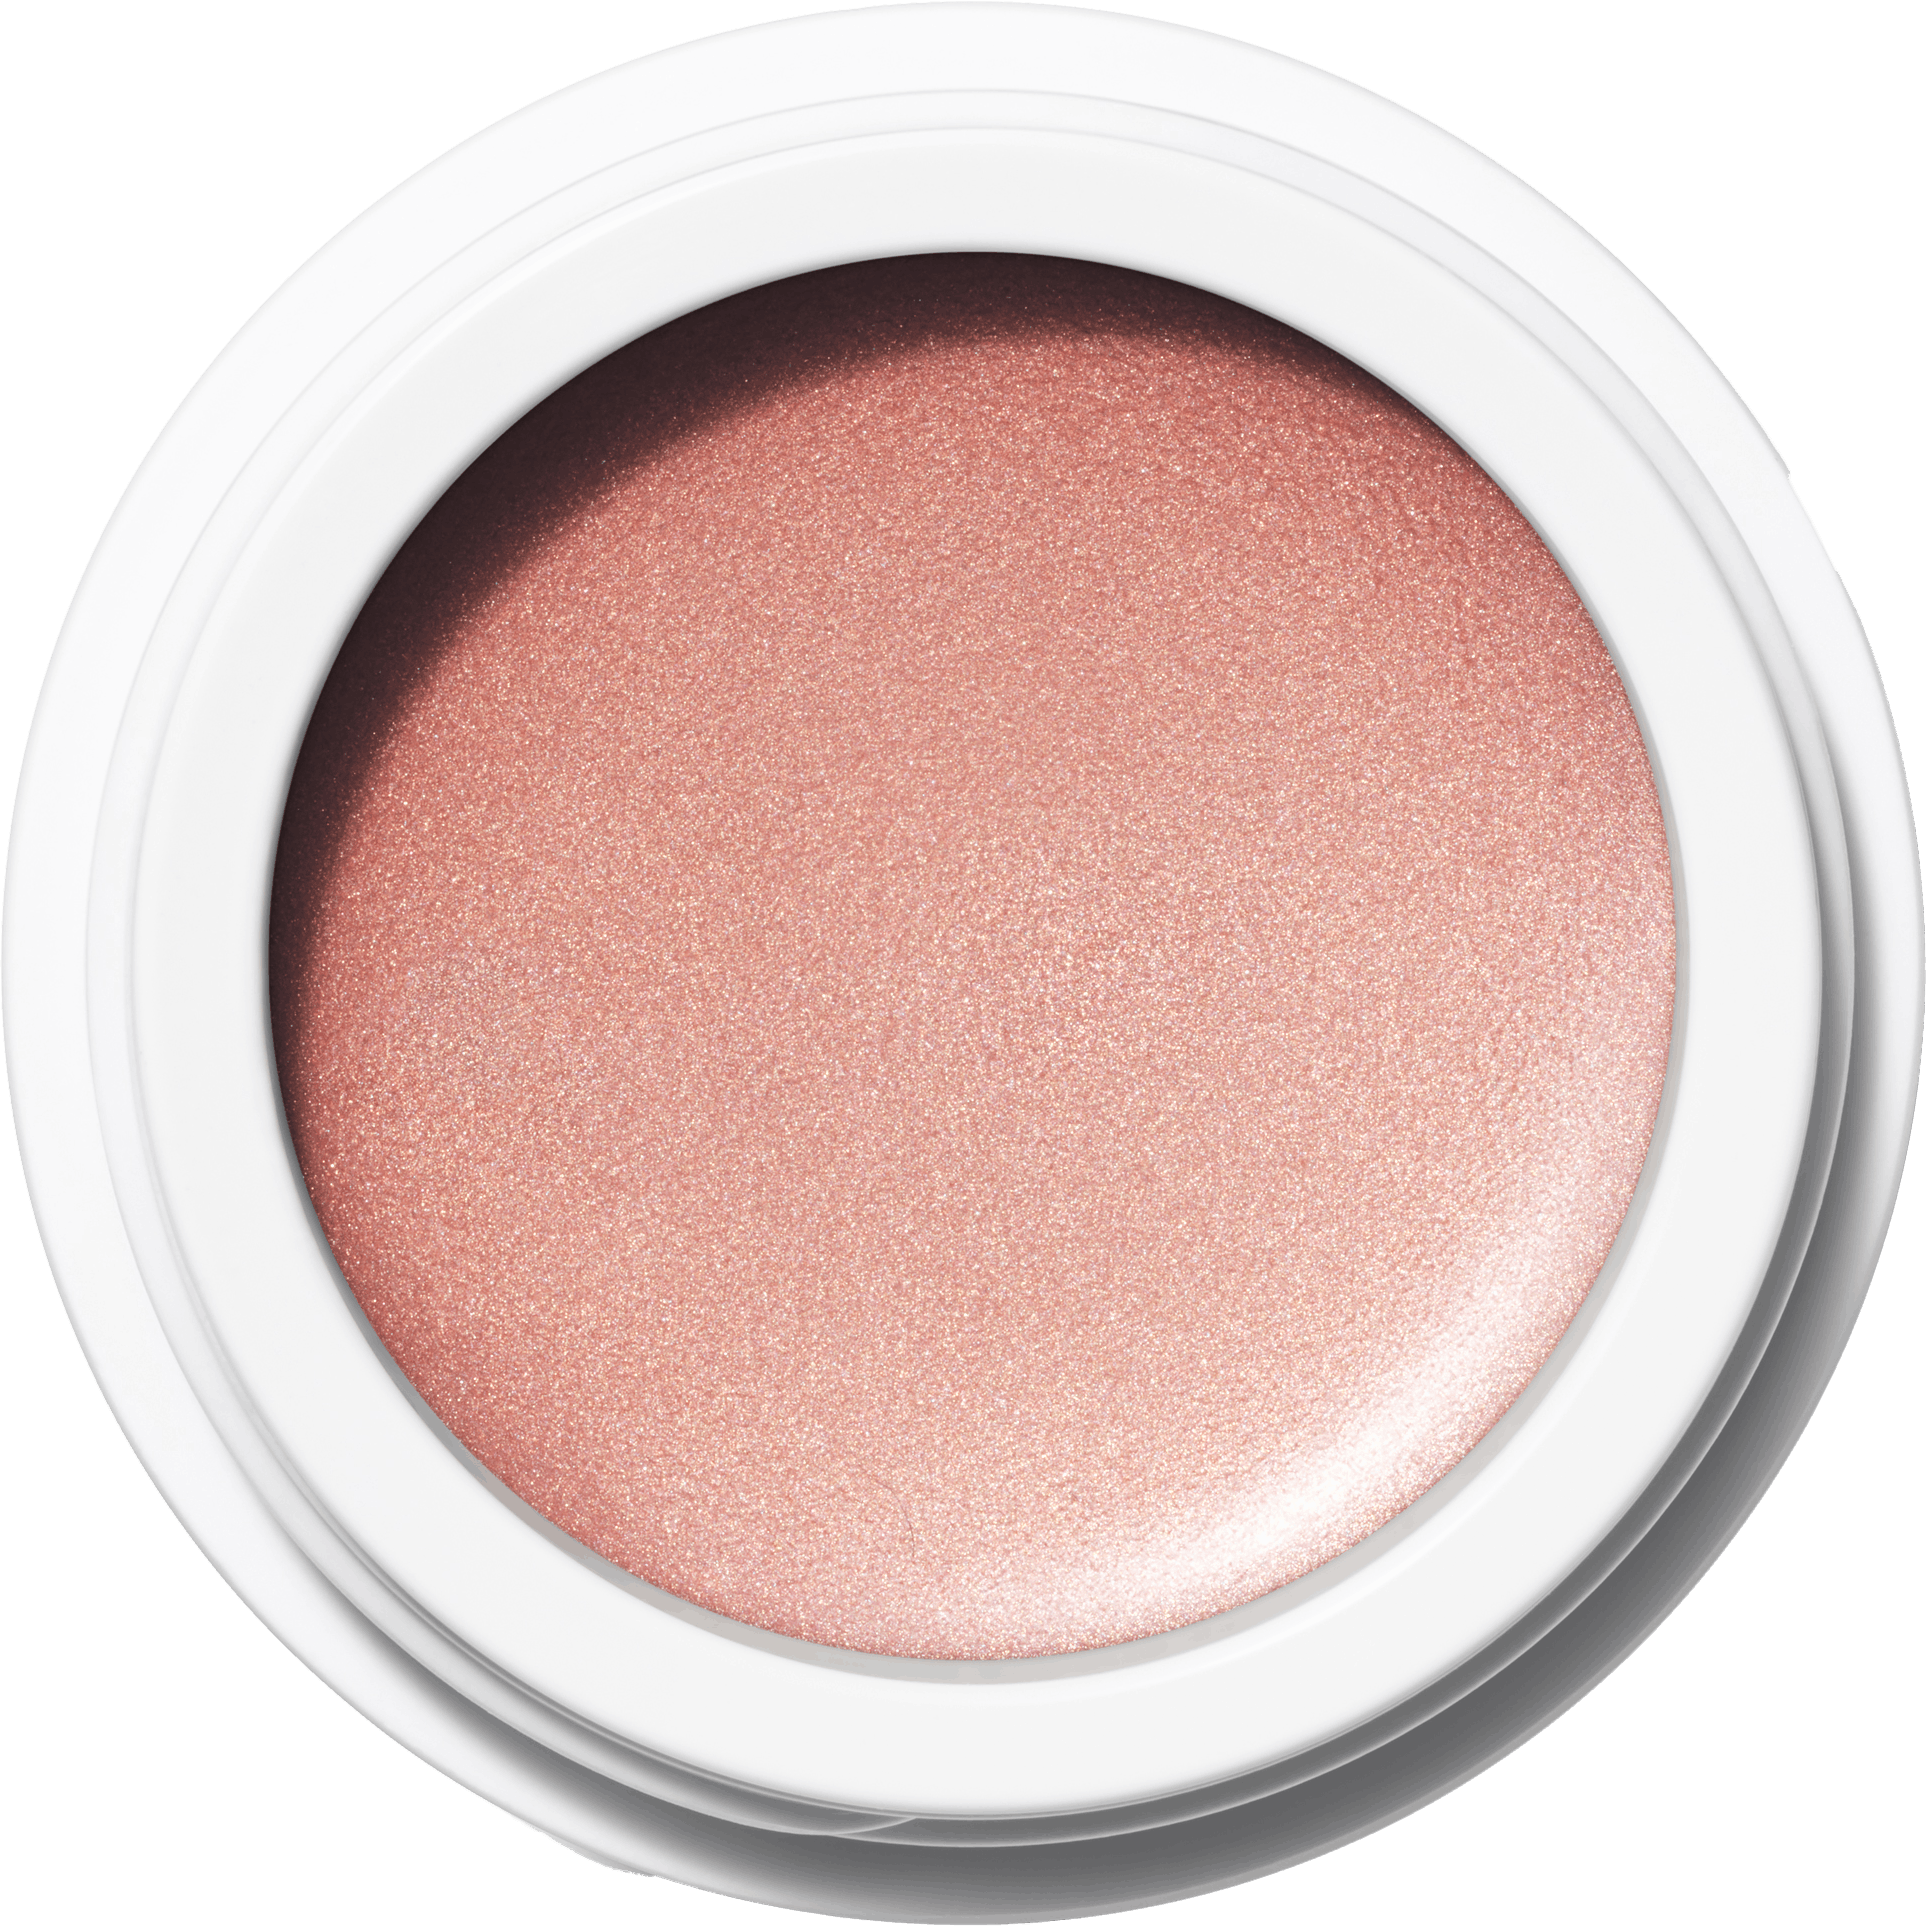 versatile neutral rose gold colour for eyes in cream texture. Buildable colour, All organic, all natural, for all skin tones